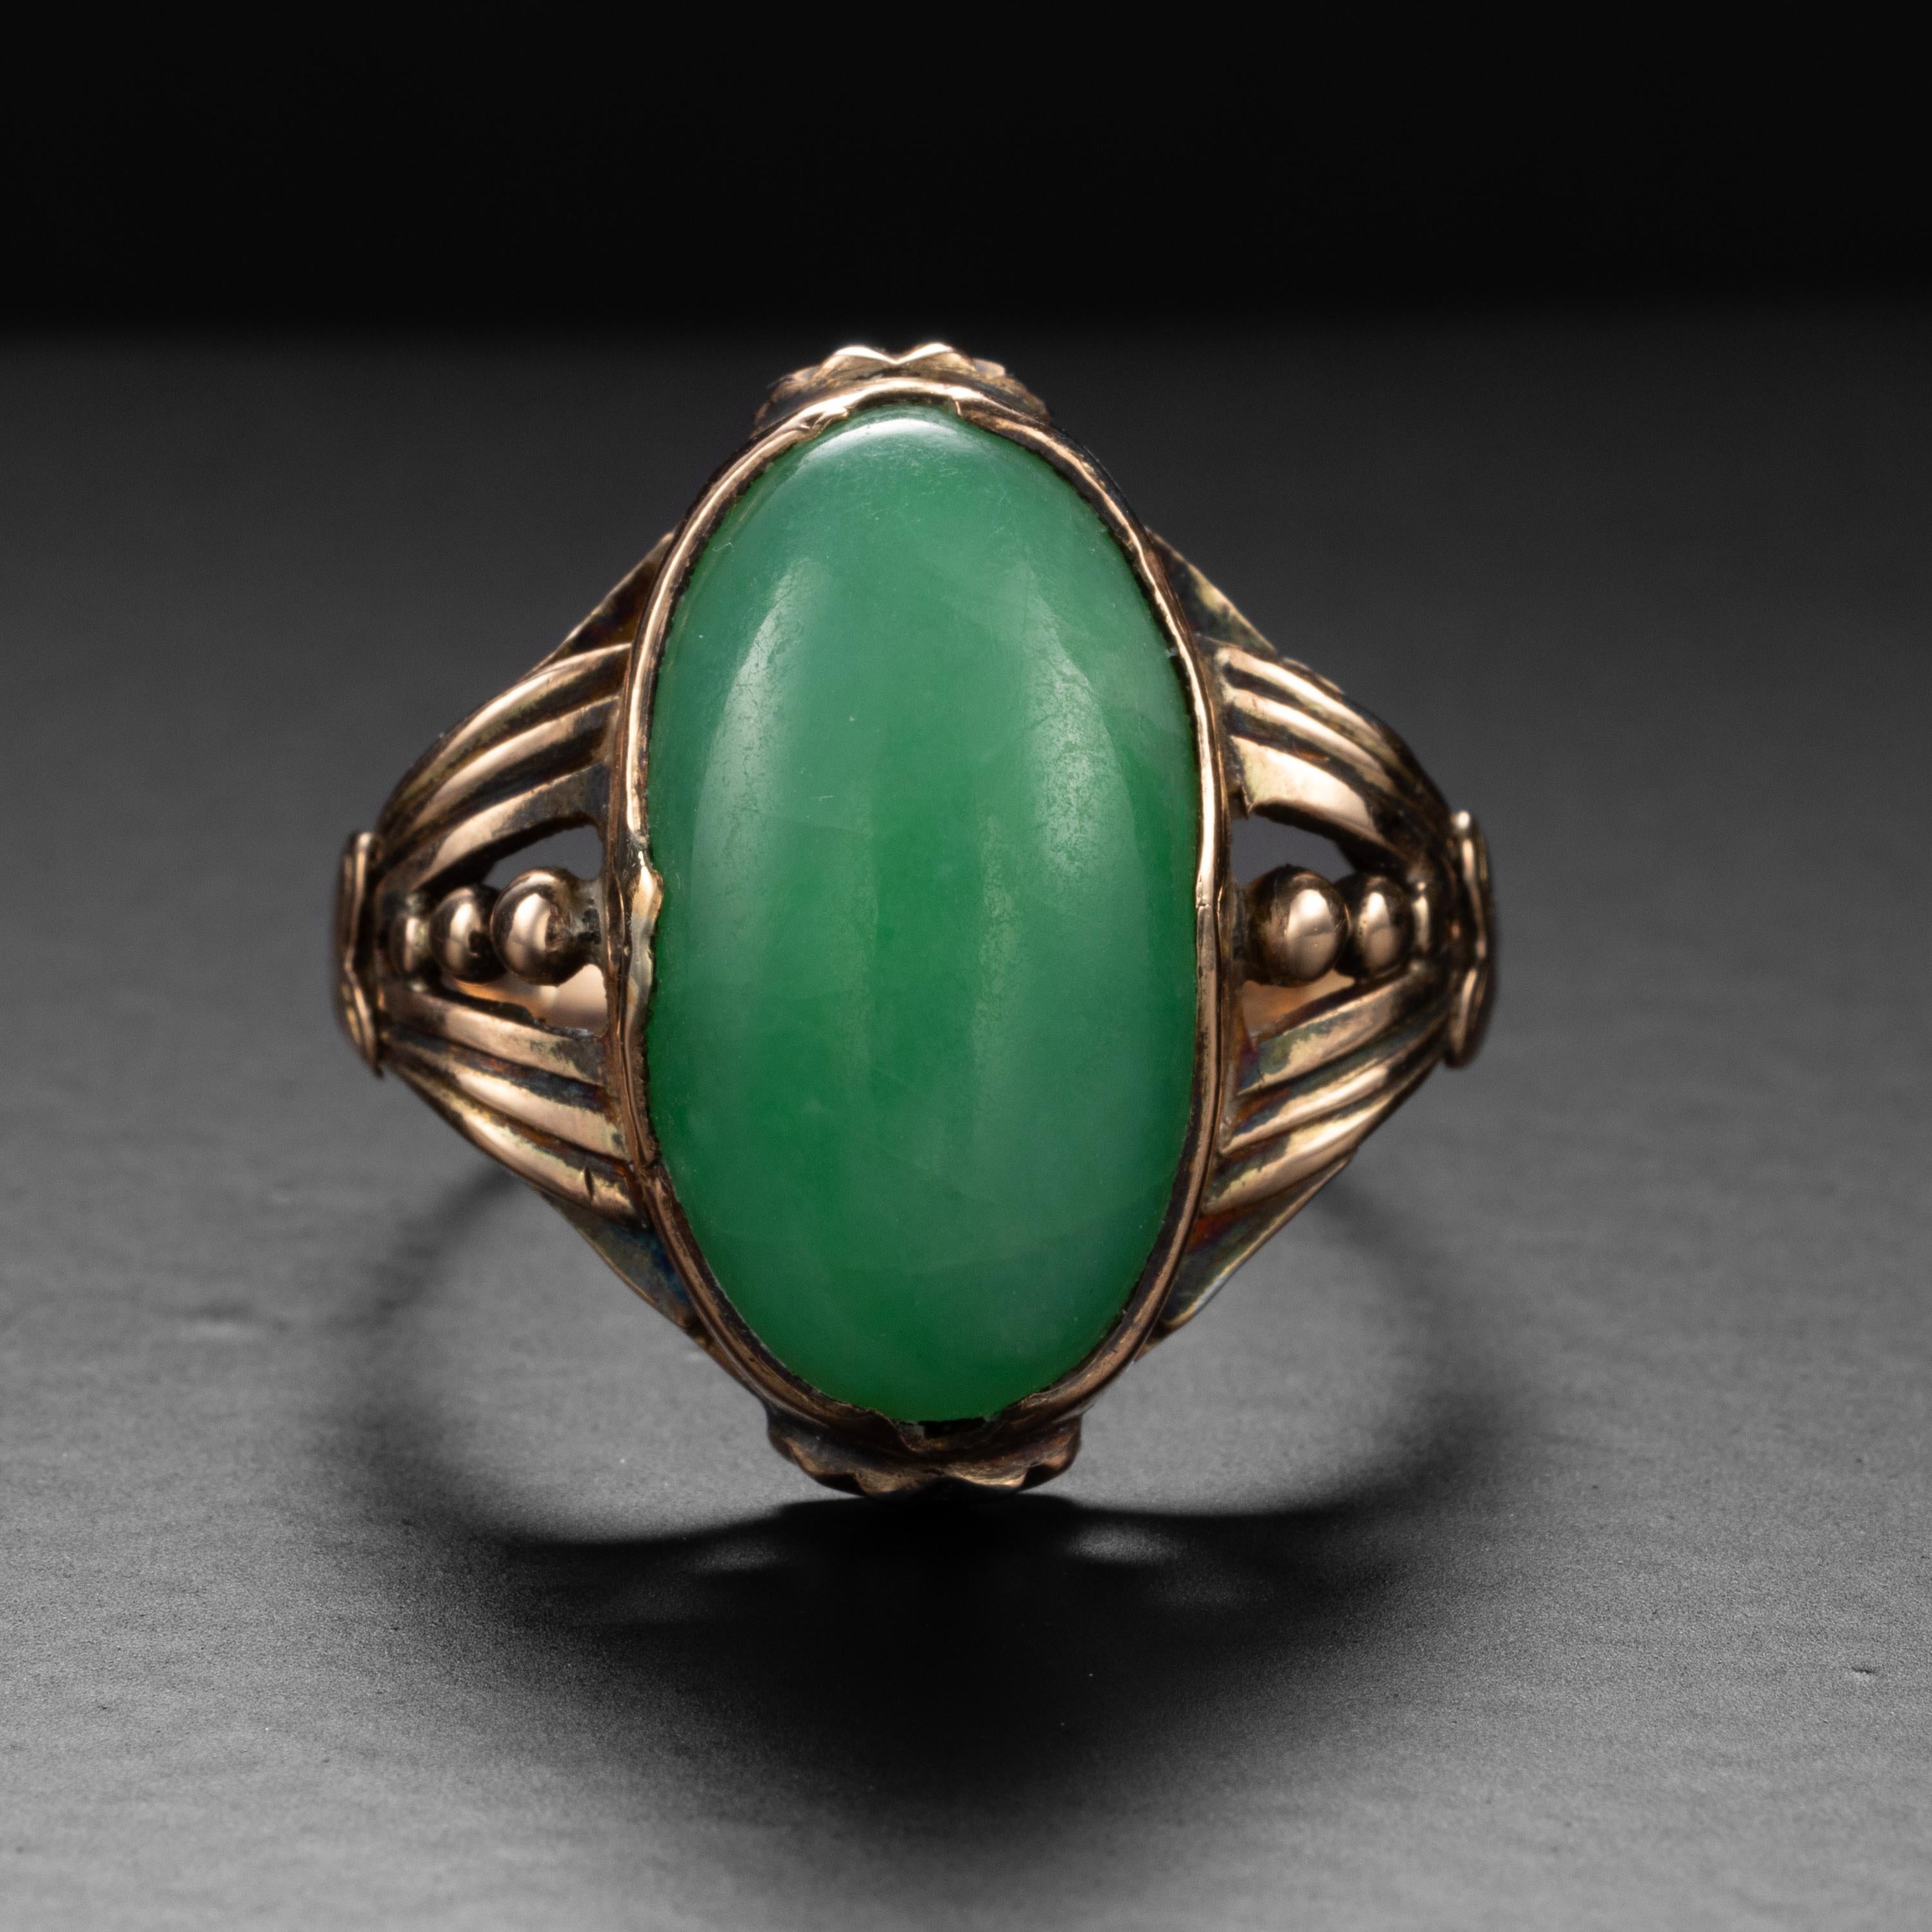 A plump oval double cabochon of bright apple green jadeite has been artfully set into a beautifully hand-fabricated 14K rose gold ring from just after the turn of the century (circa 1910). The detailing on this ring is sublime, and the jade retains